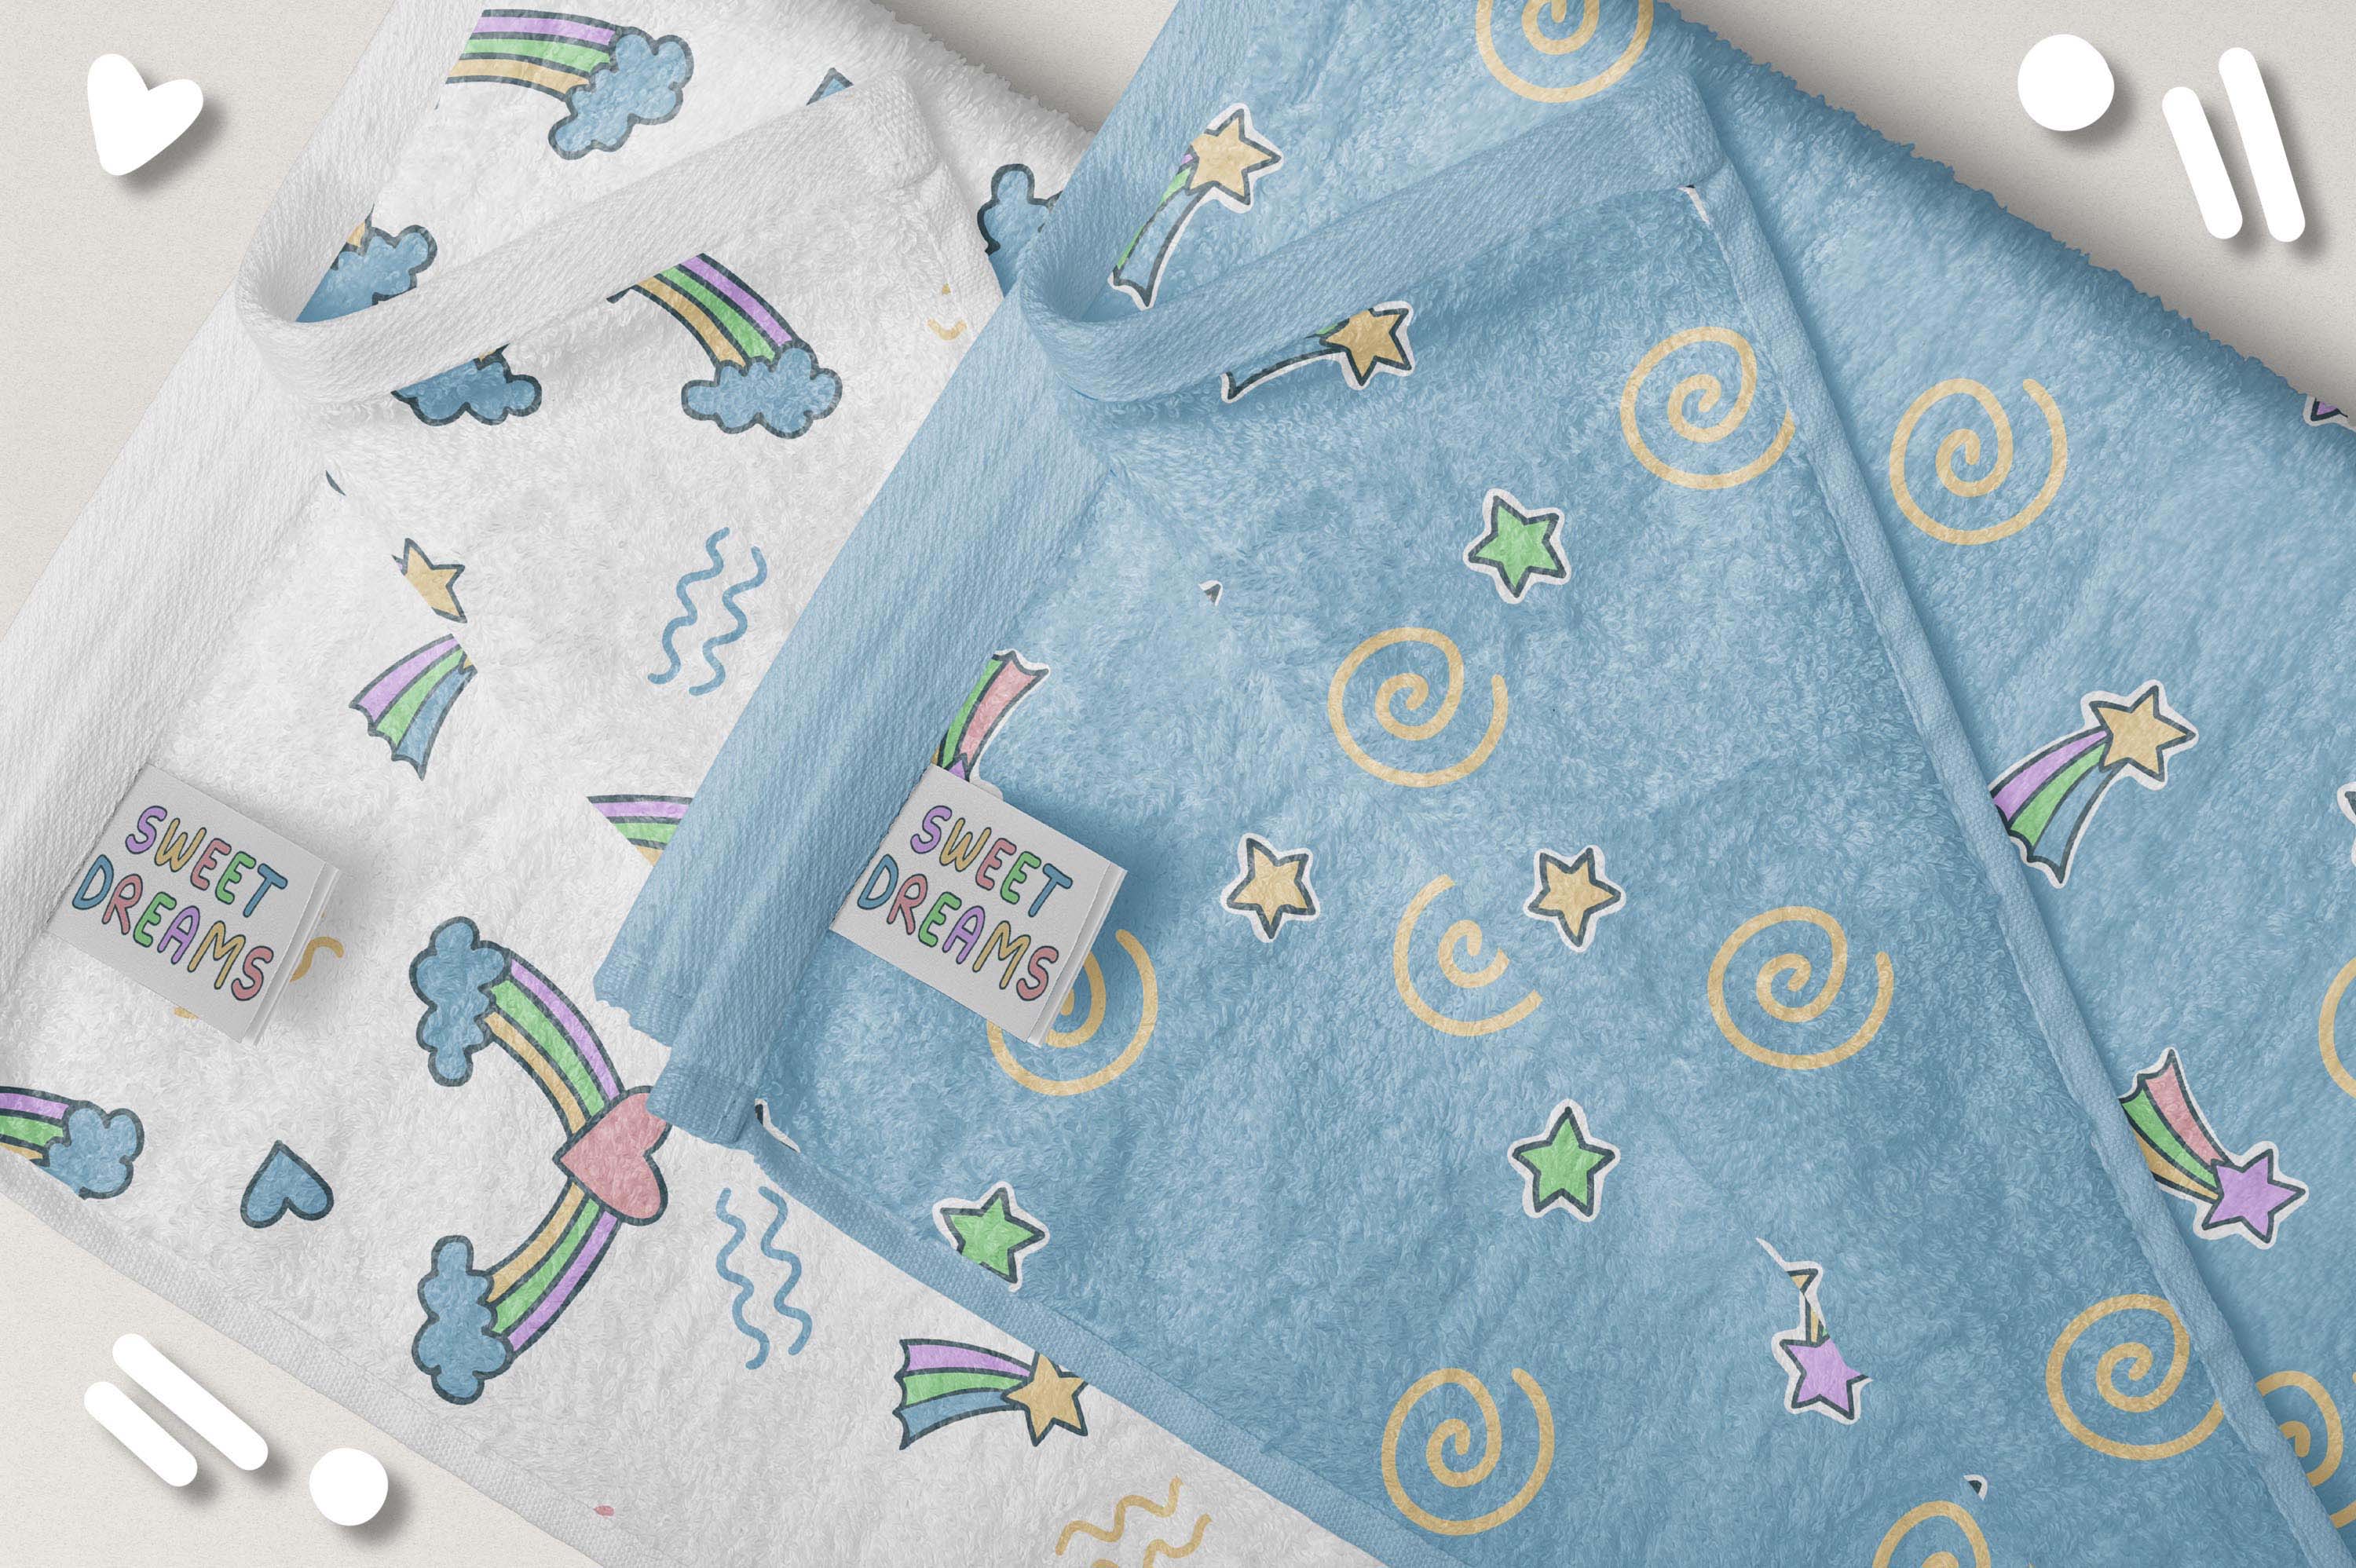 Baby Sweet Dreams Seamless Patterns Set with towels mockup.